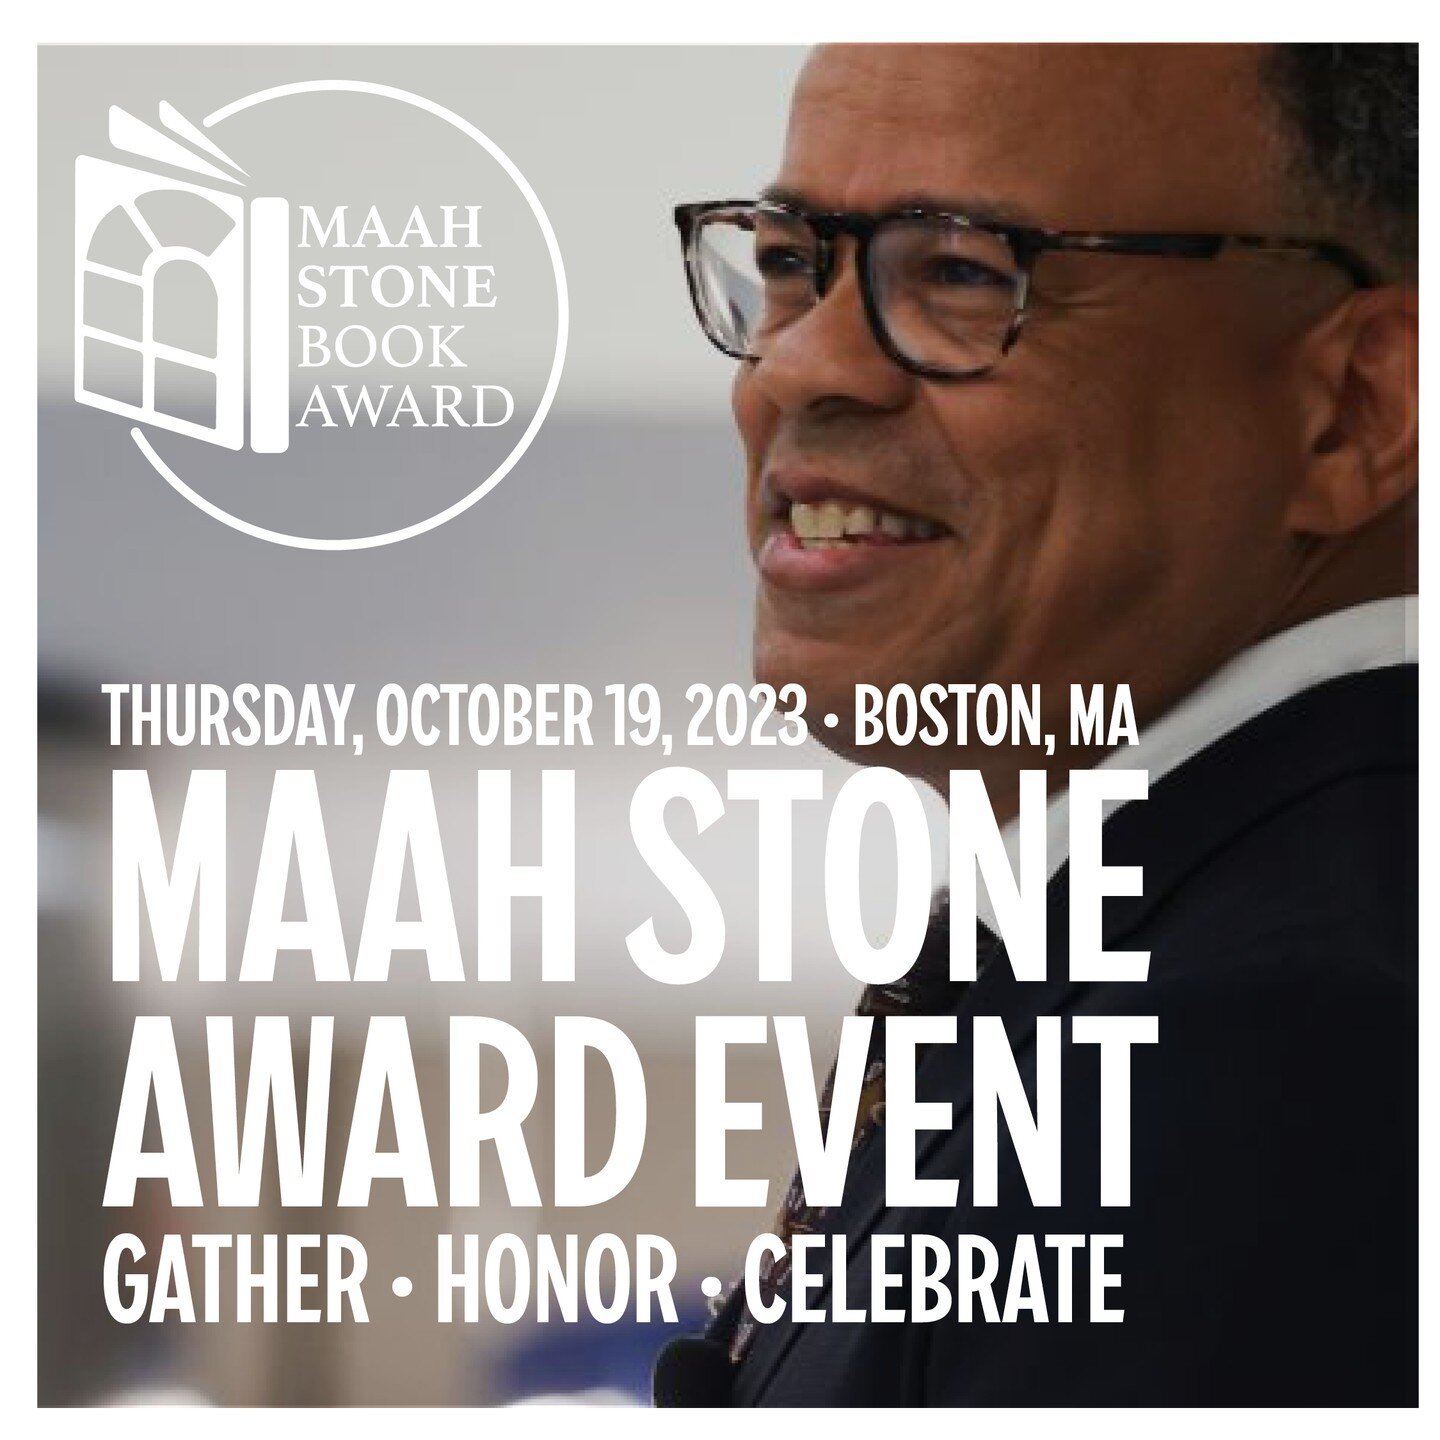 Register now bit.ly/maahstone23 and come learn more about basketball history from our $10k finalist @ClaudeJohnson, author of 'The Black Fives'! October 19th, reception @ 5:30pm/event @ 6:30pm(ET). In-person &amp; live-streamed. Bounce! @maahmuseum